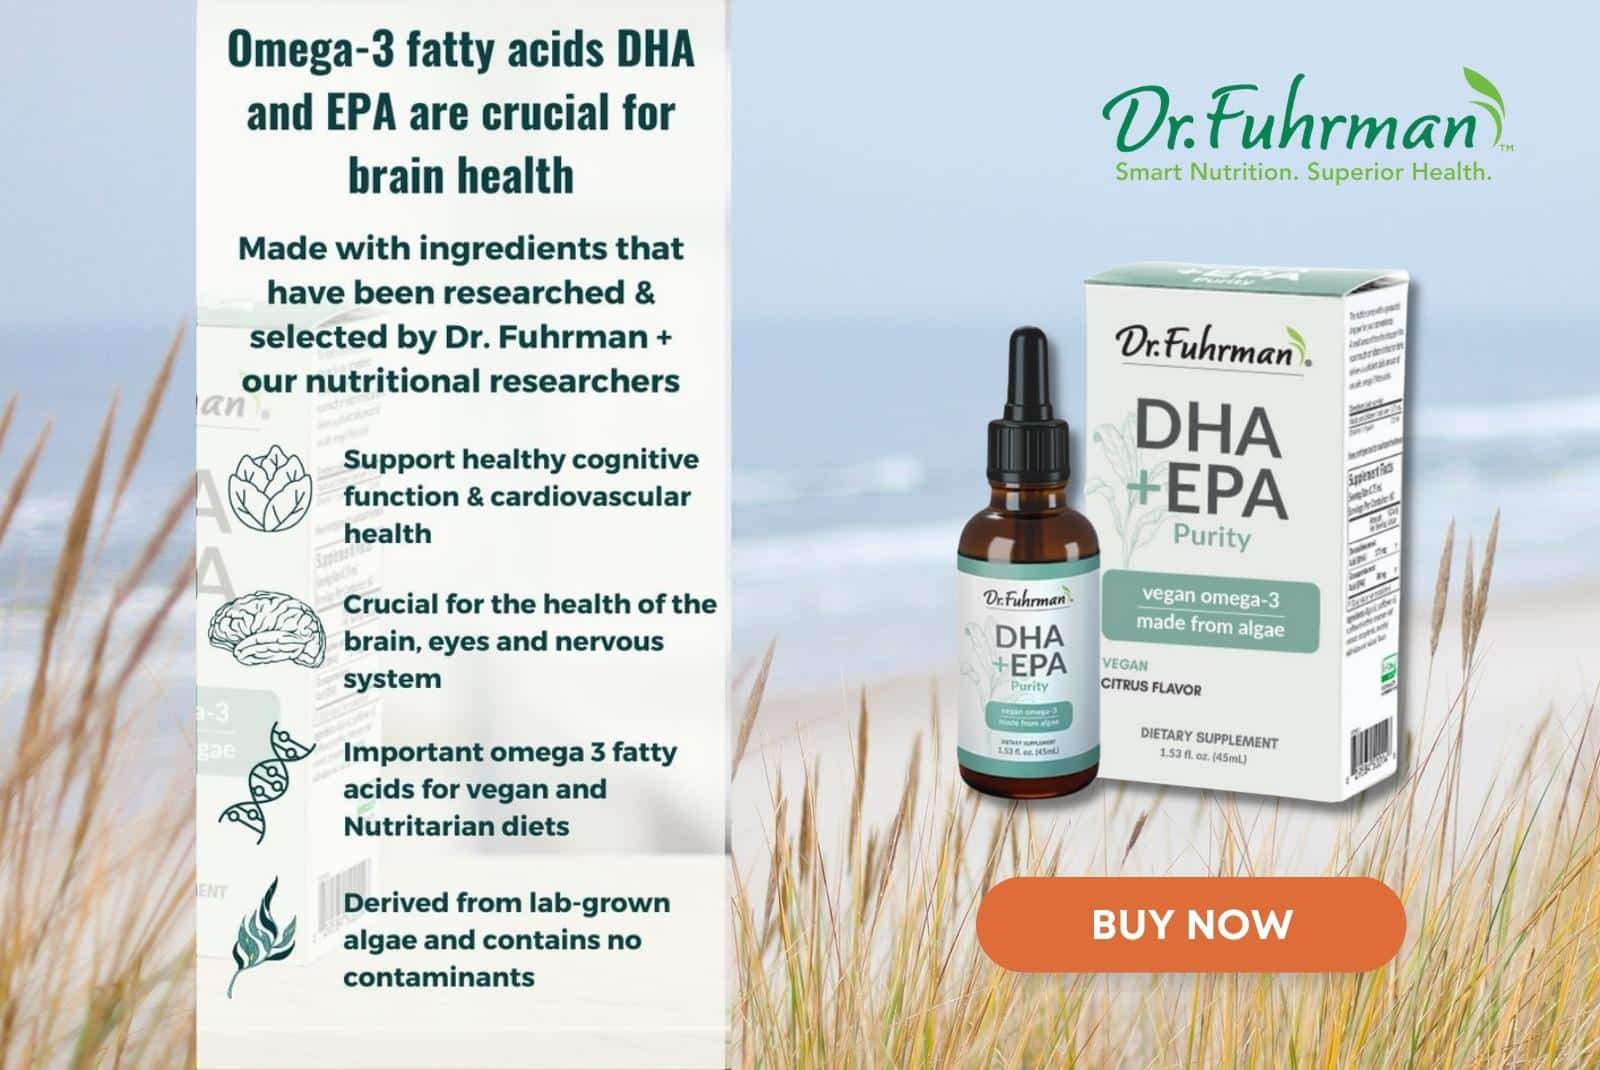 Click here to get Dr. Fuhrman's vegan DHA EPA supplement